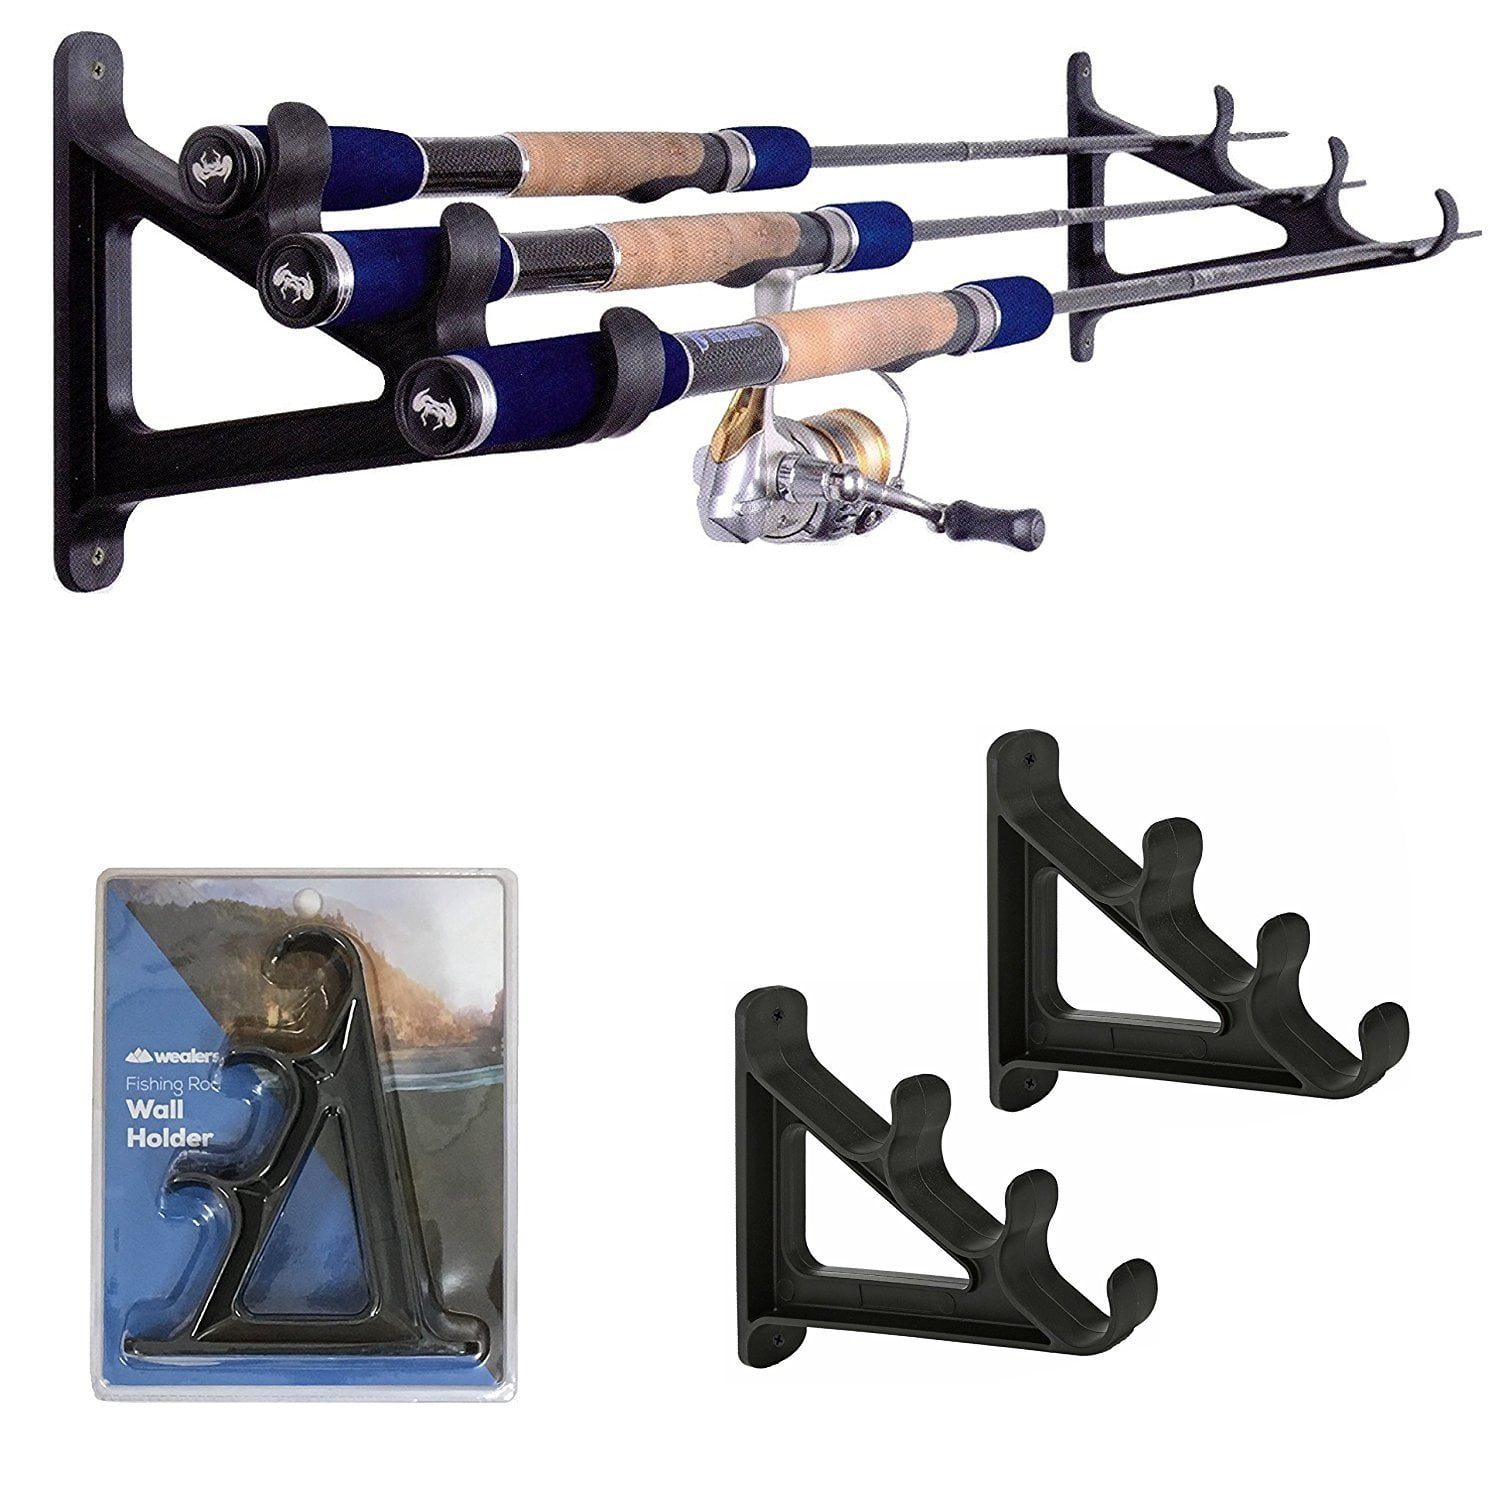 Ceiling Rod Rack Fishing Rod Rack Storage for Ceiling or Wall-Ultra Sturdy  Strong Weatherproof Indoor and Outdoor Use, Holds 6 Rods, Rod Racks -   Canada